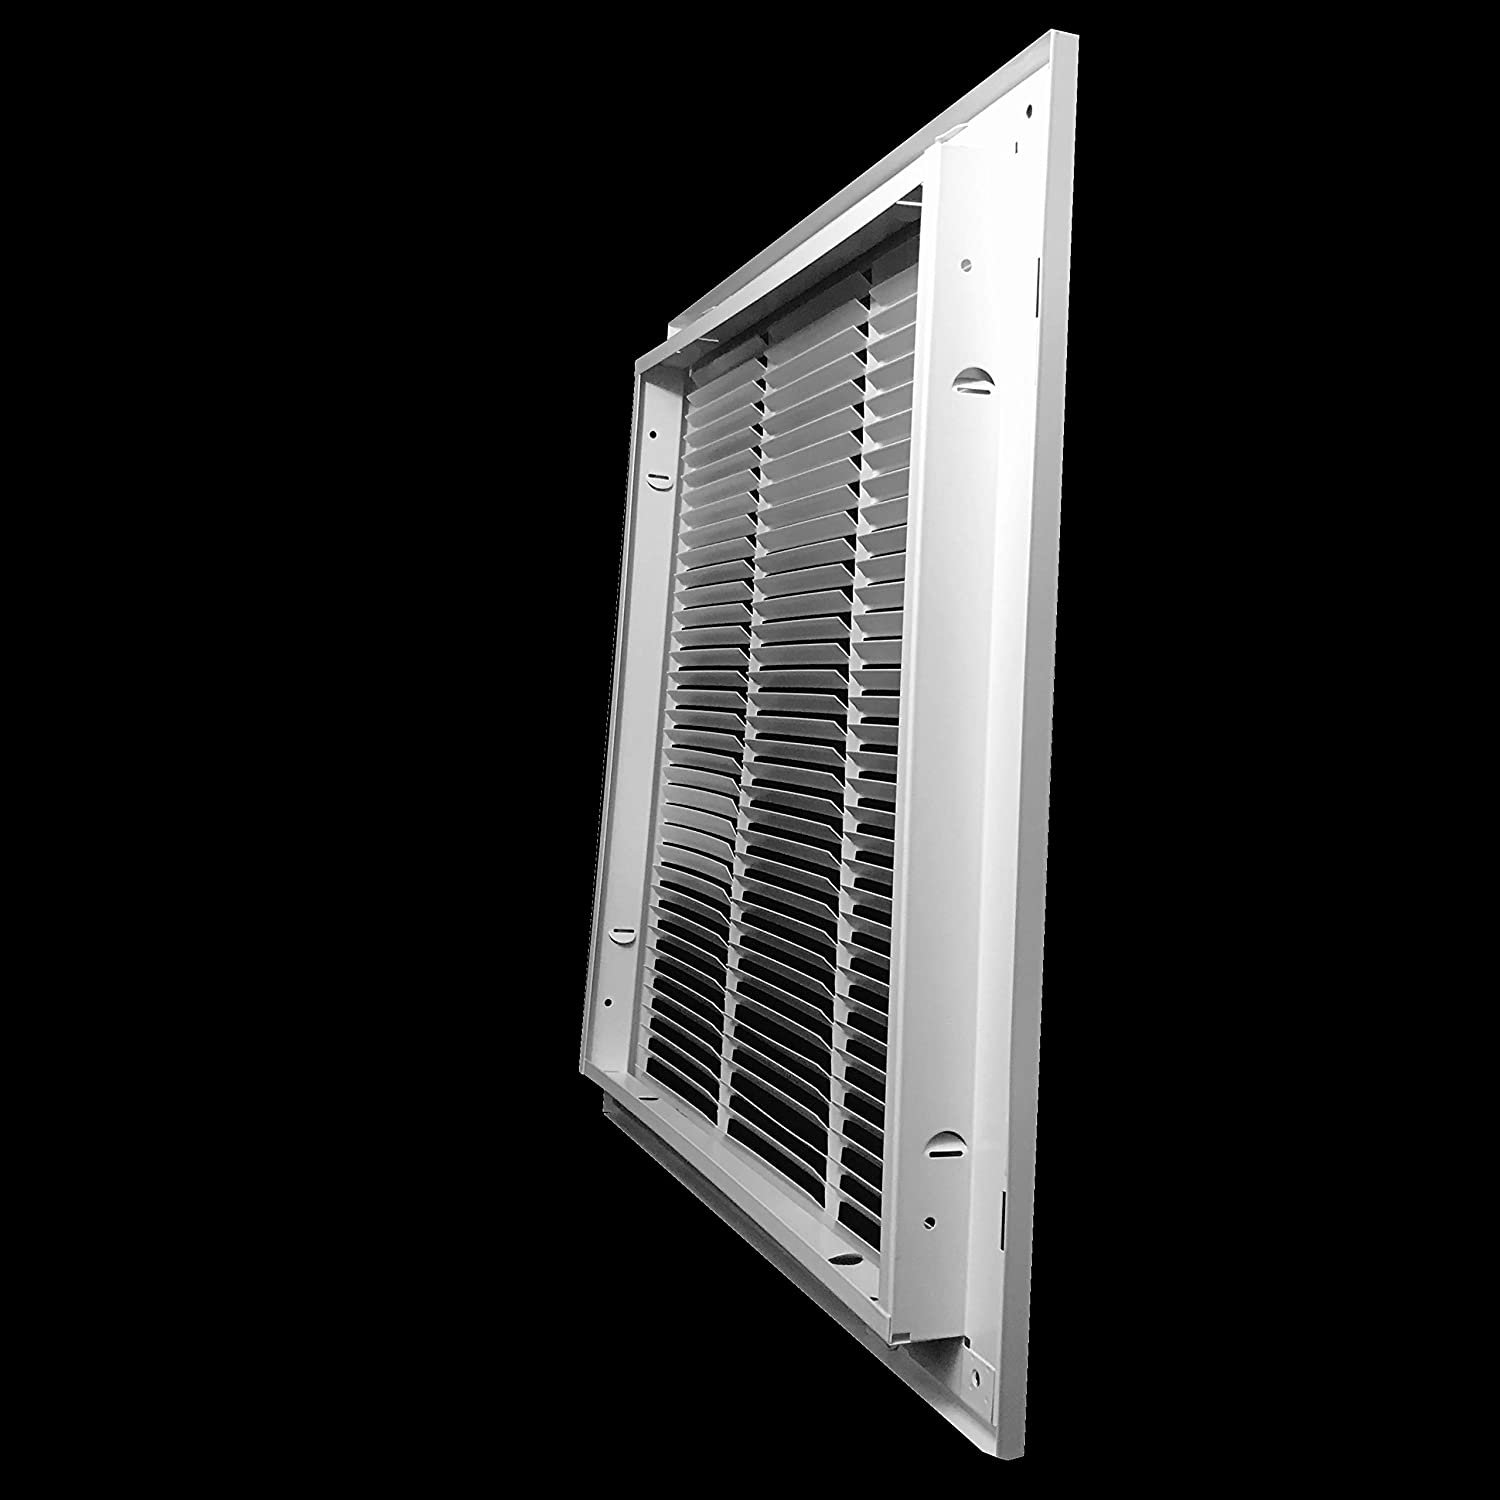 20" X 25" Duct Opening | Filter Included HD Steel Return Air Filter Grille for Sidewall and Ceiling